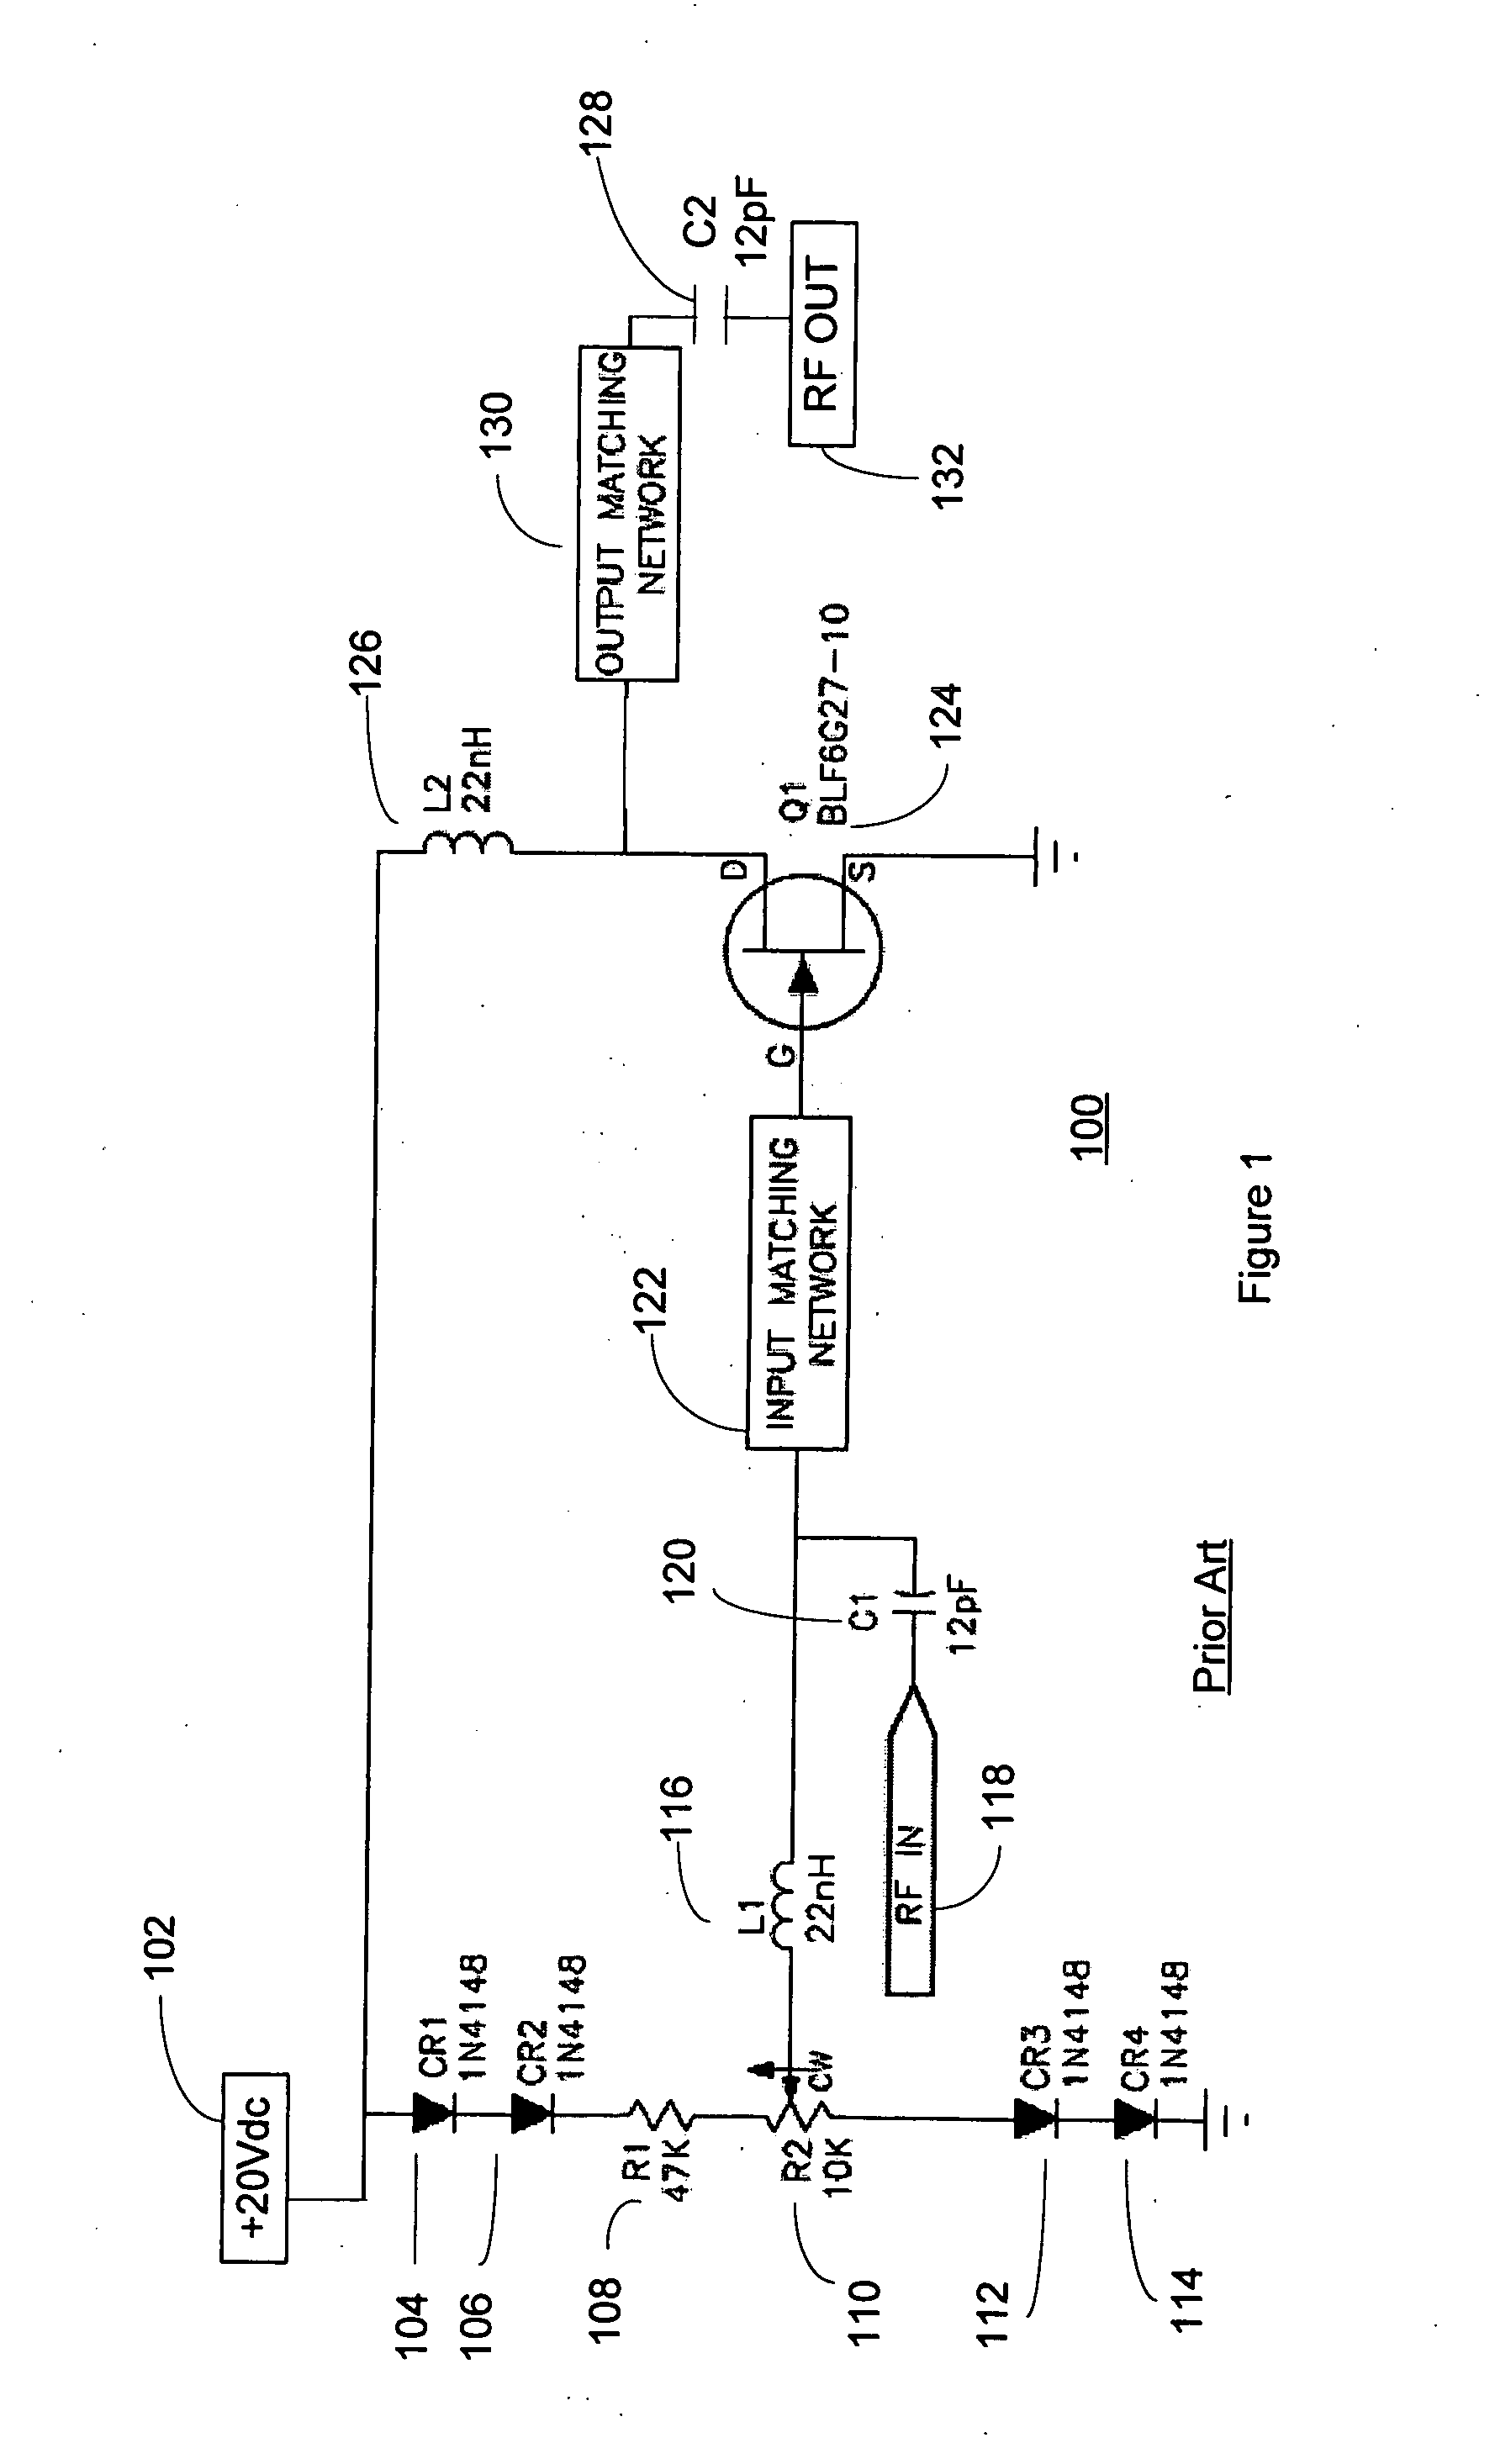 Method and system for providing automatic gate bias for field effect transistors